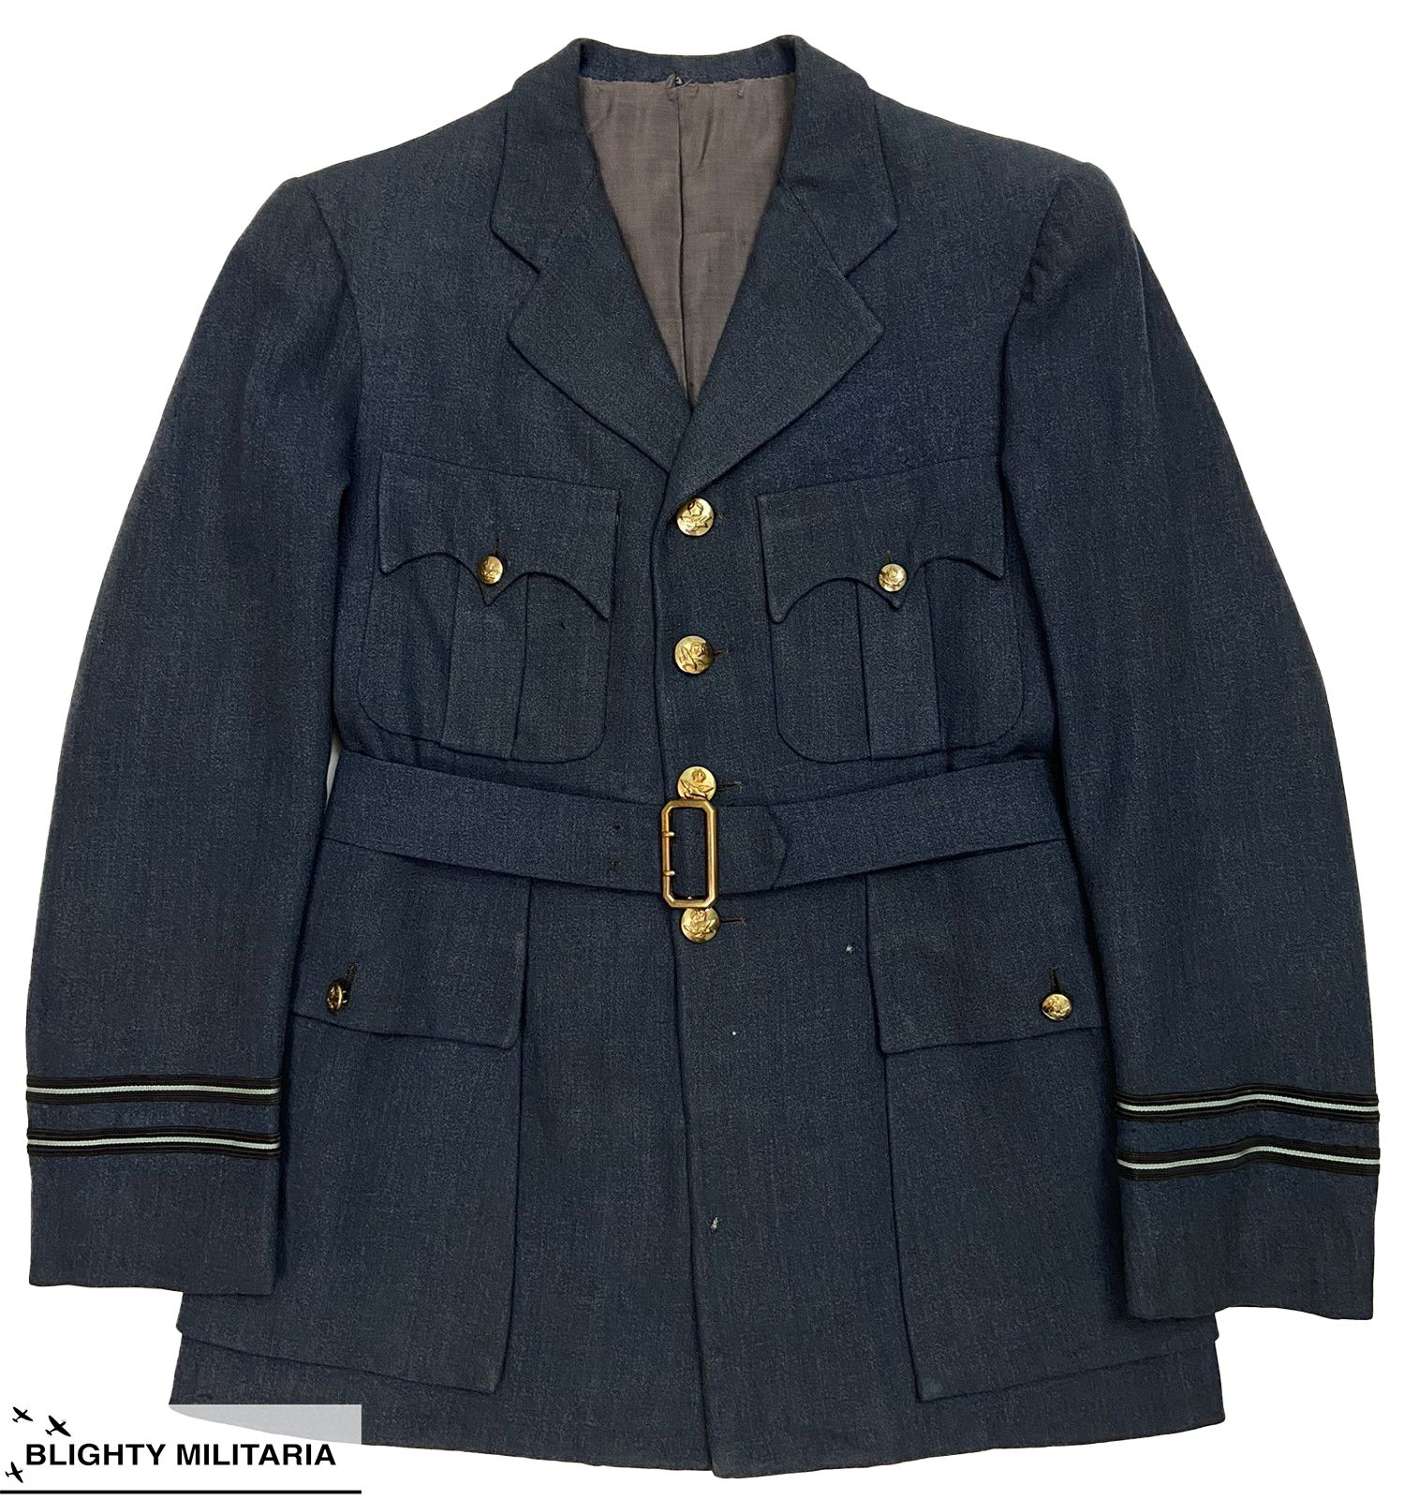 Original 1940s RAF Officers Tunic - Size 38